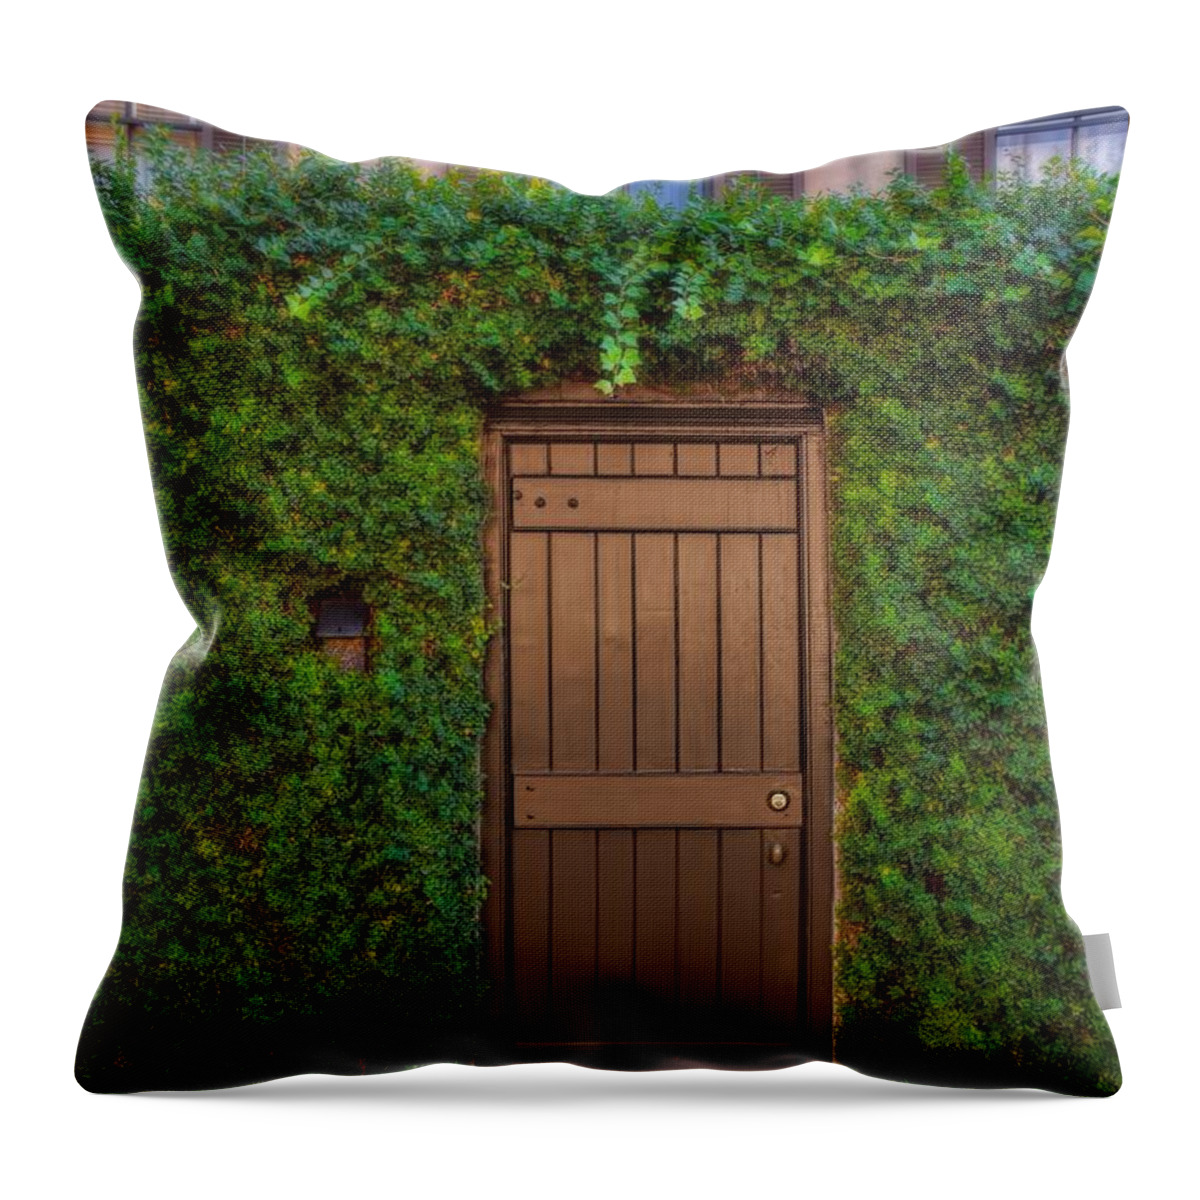 Savannah Throw Pillow featuring the photograph Door in the Hedge Savannah by Henry Kowalski